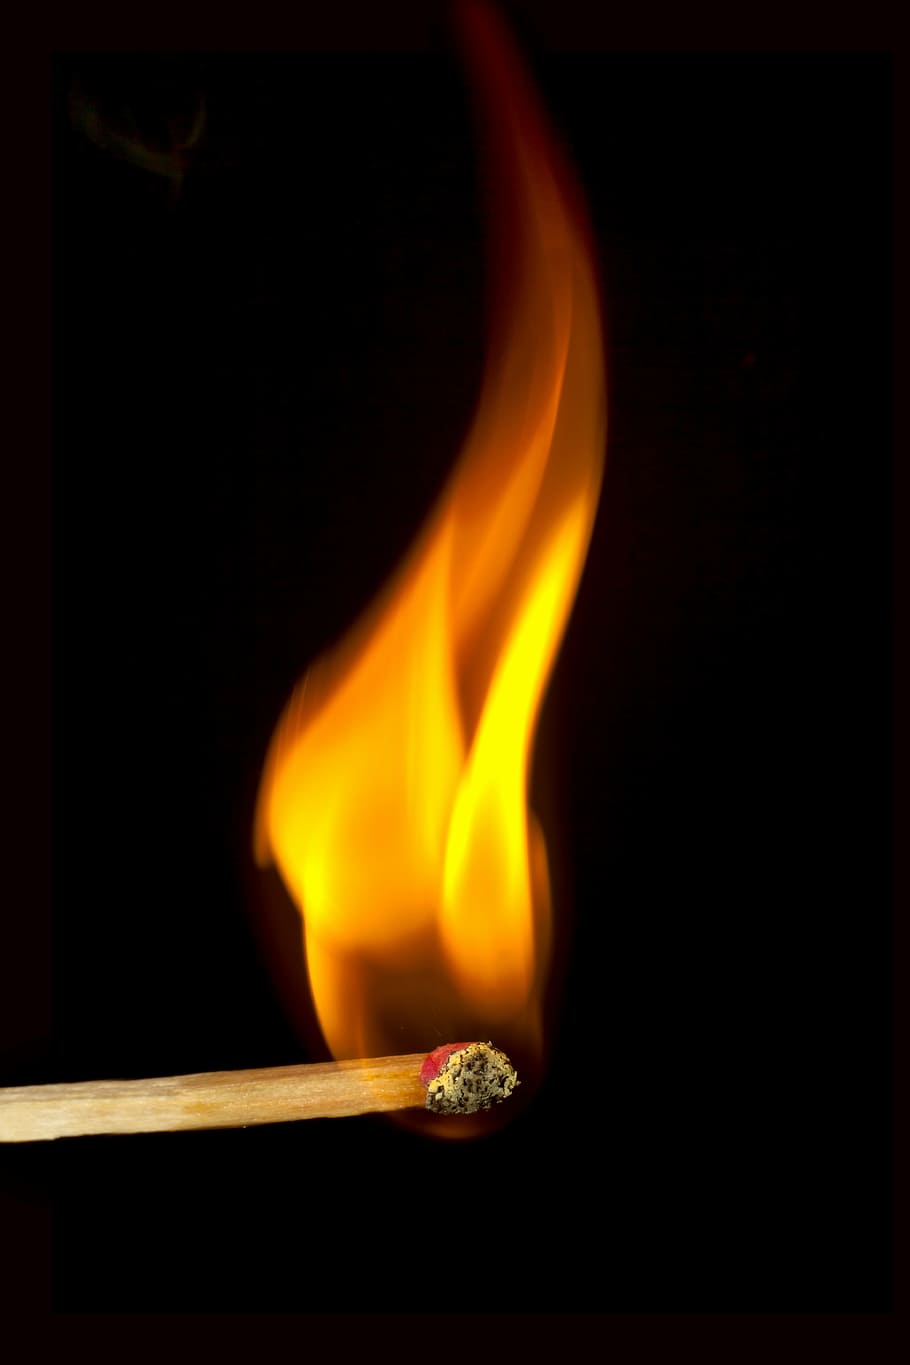 match stick with flame, fire, close, burn, matches, kindle, macro